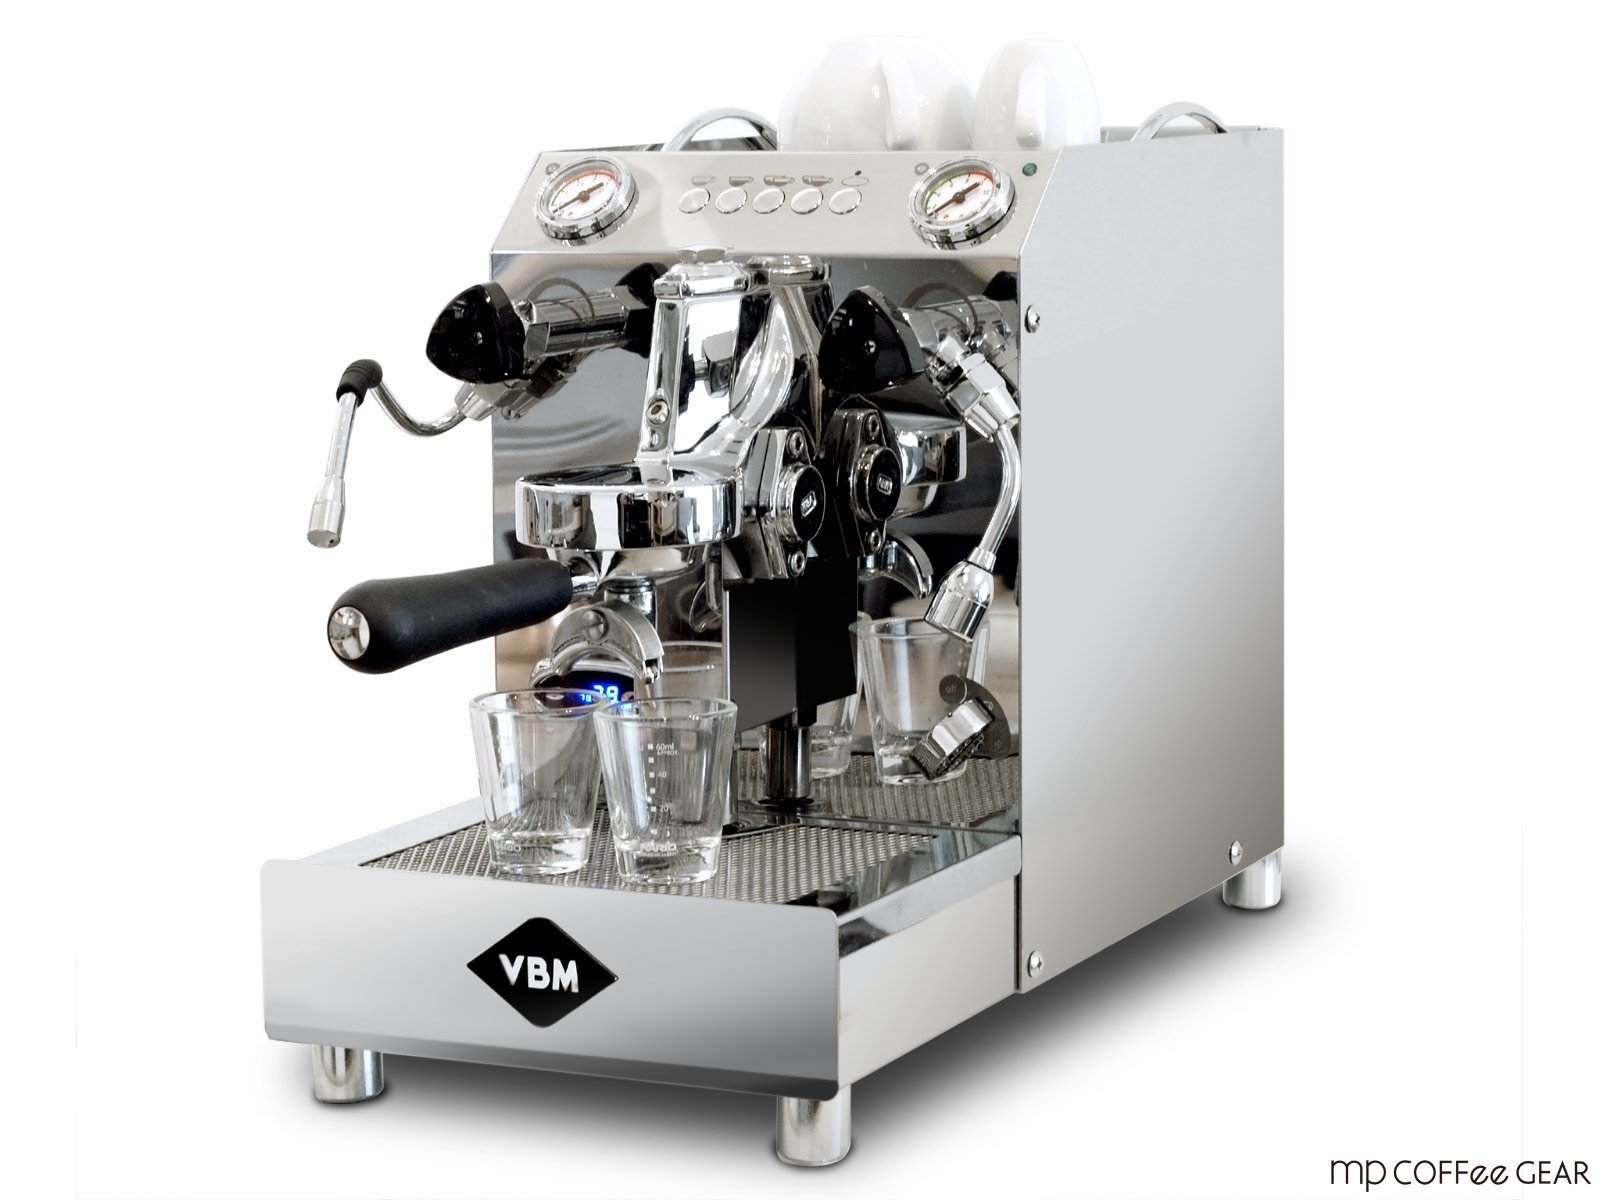 mp coffee gear DOMOBAR SUPER DOUBLE (ドモバ− スーパーダブル)　水道直結式200V仕様 / VBM（ビビエンメ）<img class='new_mark_img2' src='https://img.shop-pro.jp/img/new/icons16.gif' style='border:none;display:inline;margin:0px;padding:0px;width:auto;' />